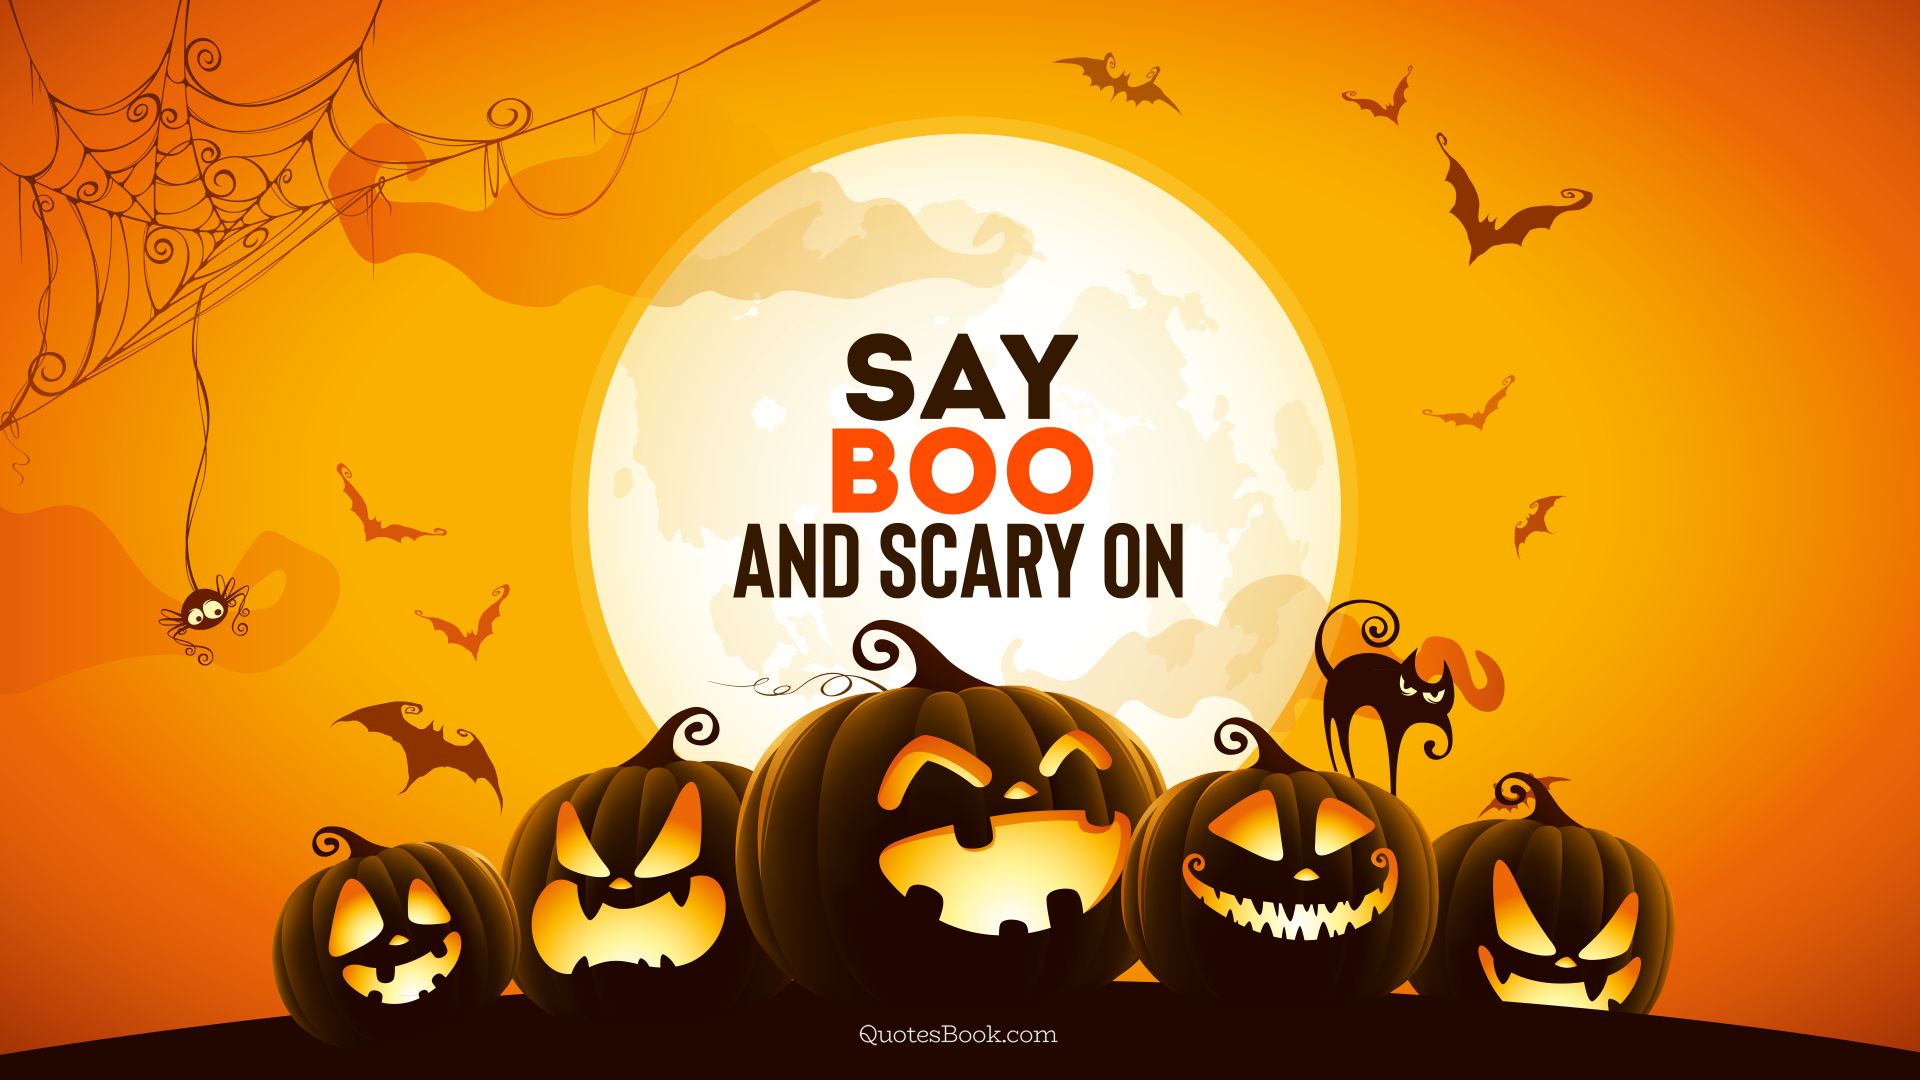 Say boo and scary on